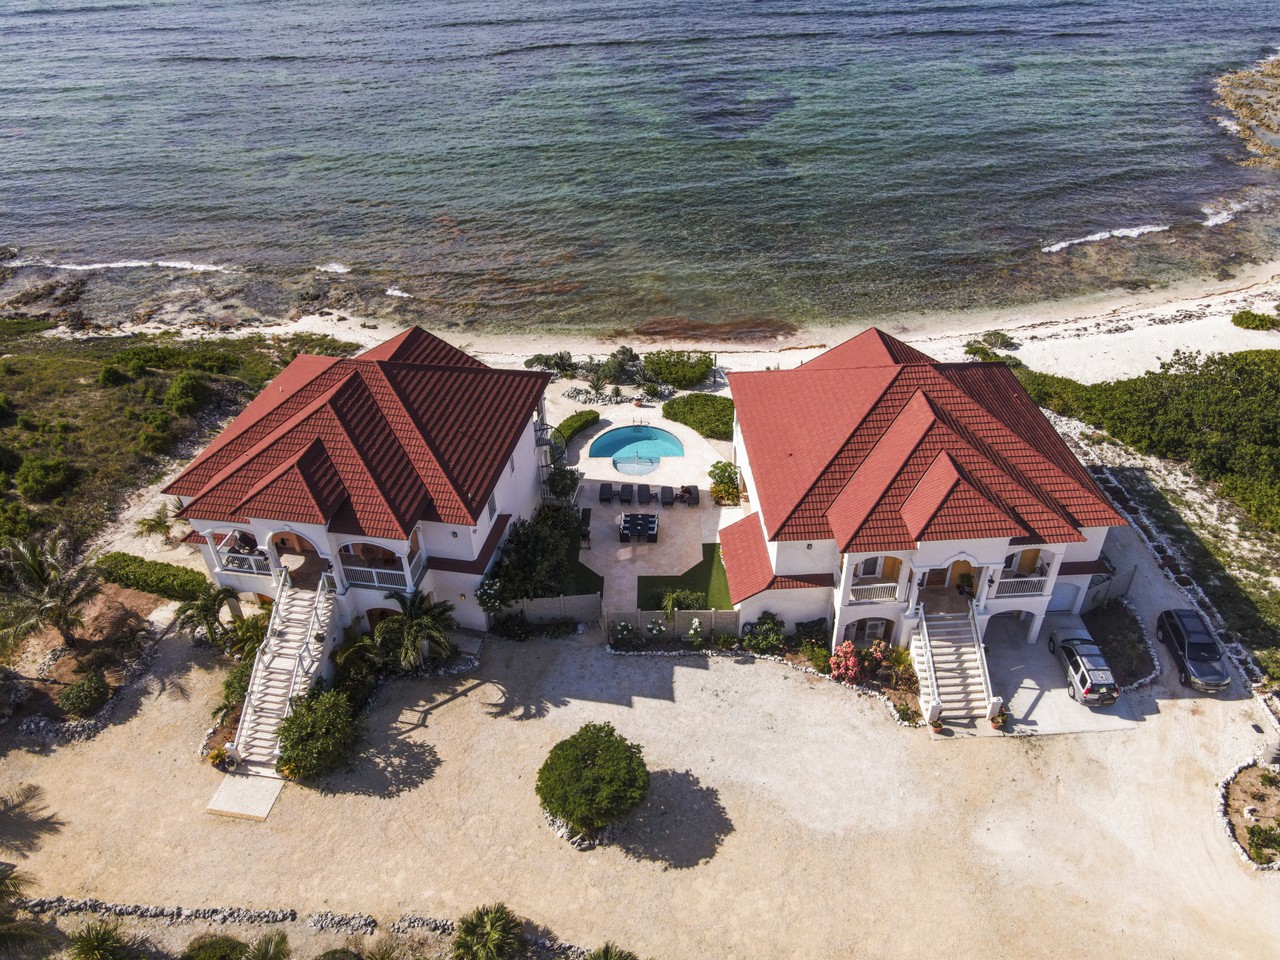 Exclusive luxury for your Cayman vacation in two splendid apartments